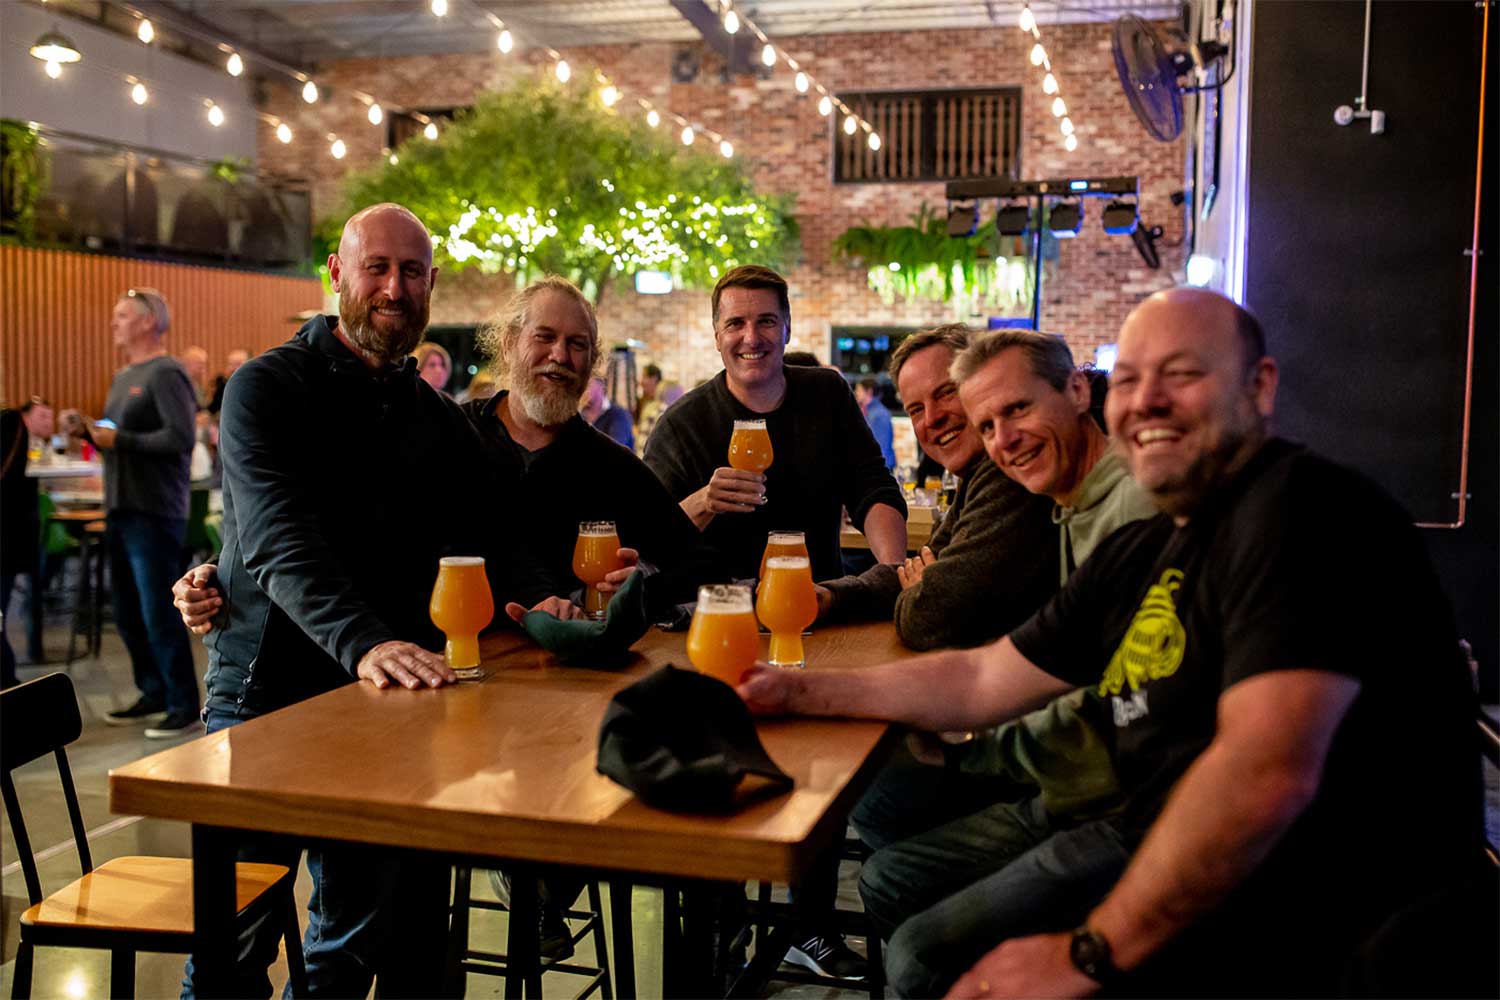 Group of men having a beer together at a brewery